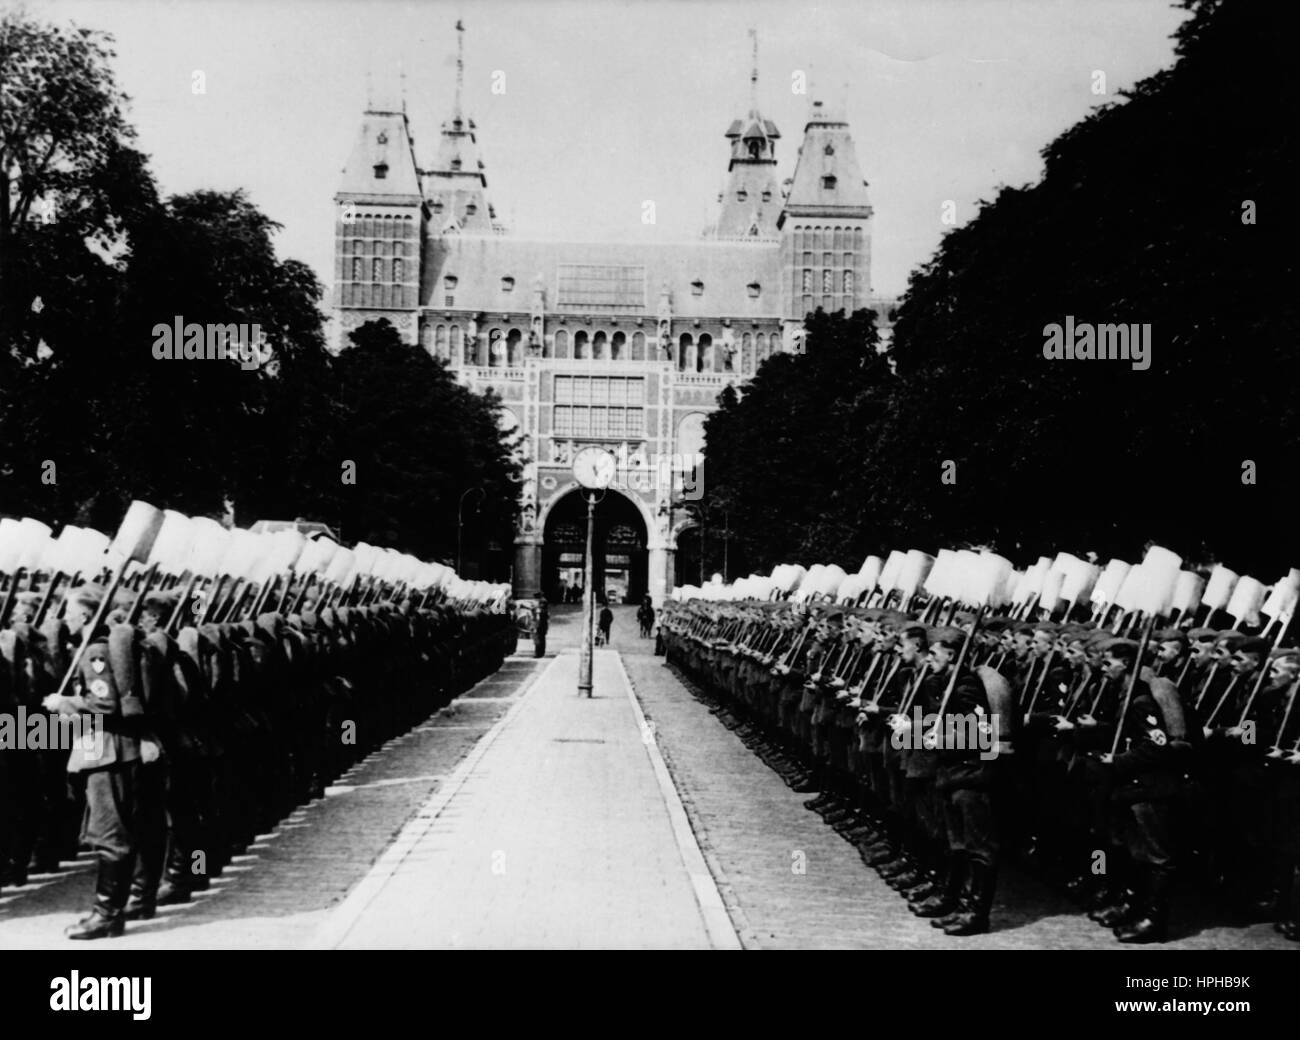 The Nazi propaganda image shows a 'Reichsarbeitsdienst' (Reich Labour Service) march in the occupied Netherlands. Taken in August 1940. In the background is the Rijksmuseum Amsterdam. A Nazi reporter has written on the reverse of the picture on 08.08.1940, 'Reich Labour Service parade in Amsterdam. Amsterdam experienced its first parade with sections of the Reich Labour Service. The march concluded with the passing through of Reichskommissar (Reich Commissioner) Dr Seyss-Inquart. - Reich Labour Service in formation outside the Rijksmuseum (in the background). Fotoarchiv für Zeitgeschichte - Stock Photo